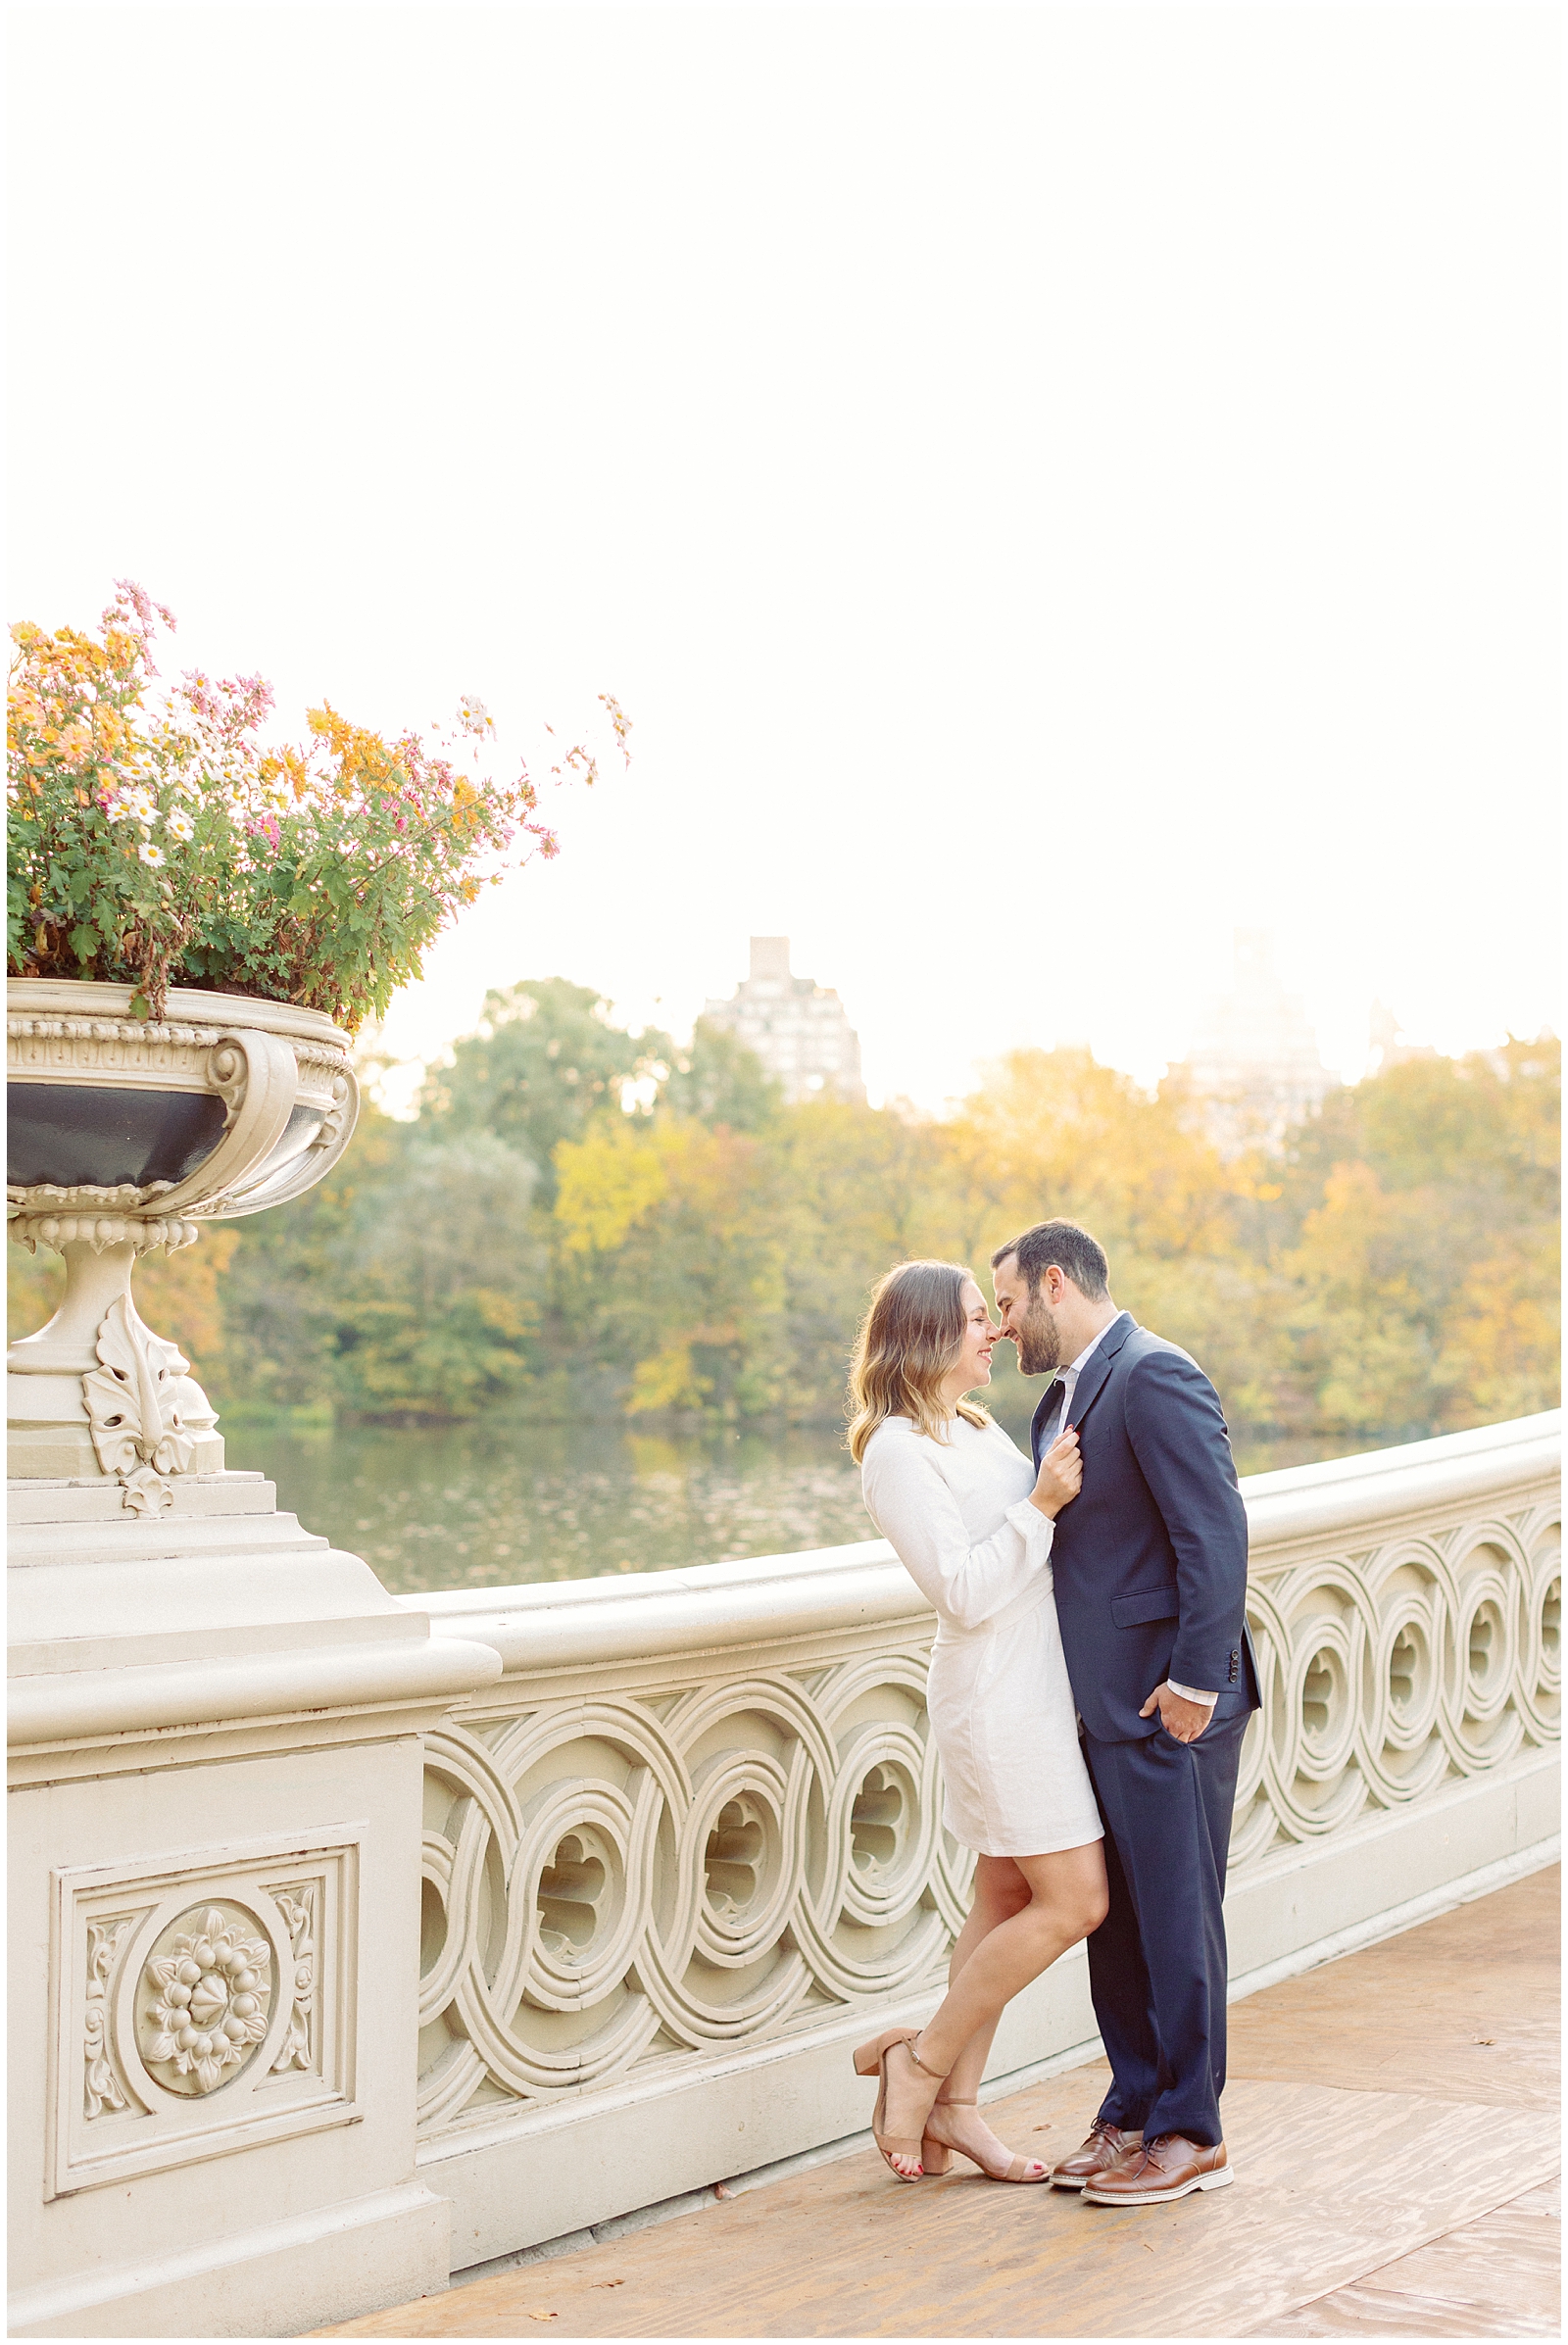 Fall NYC Central Park Engagement Sunrise at Bow Bridge